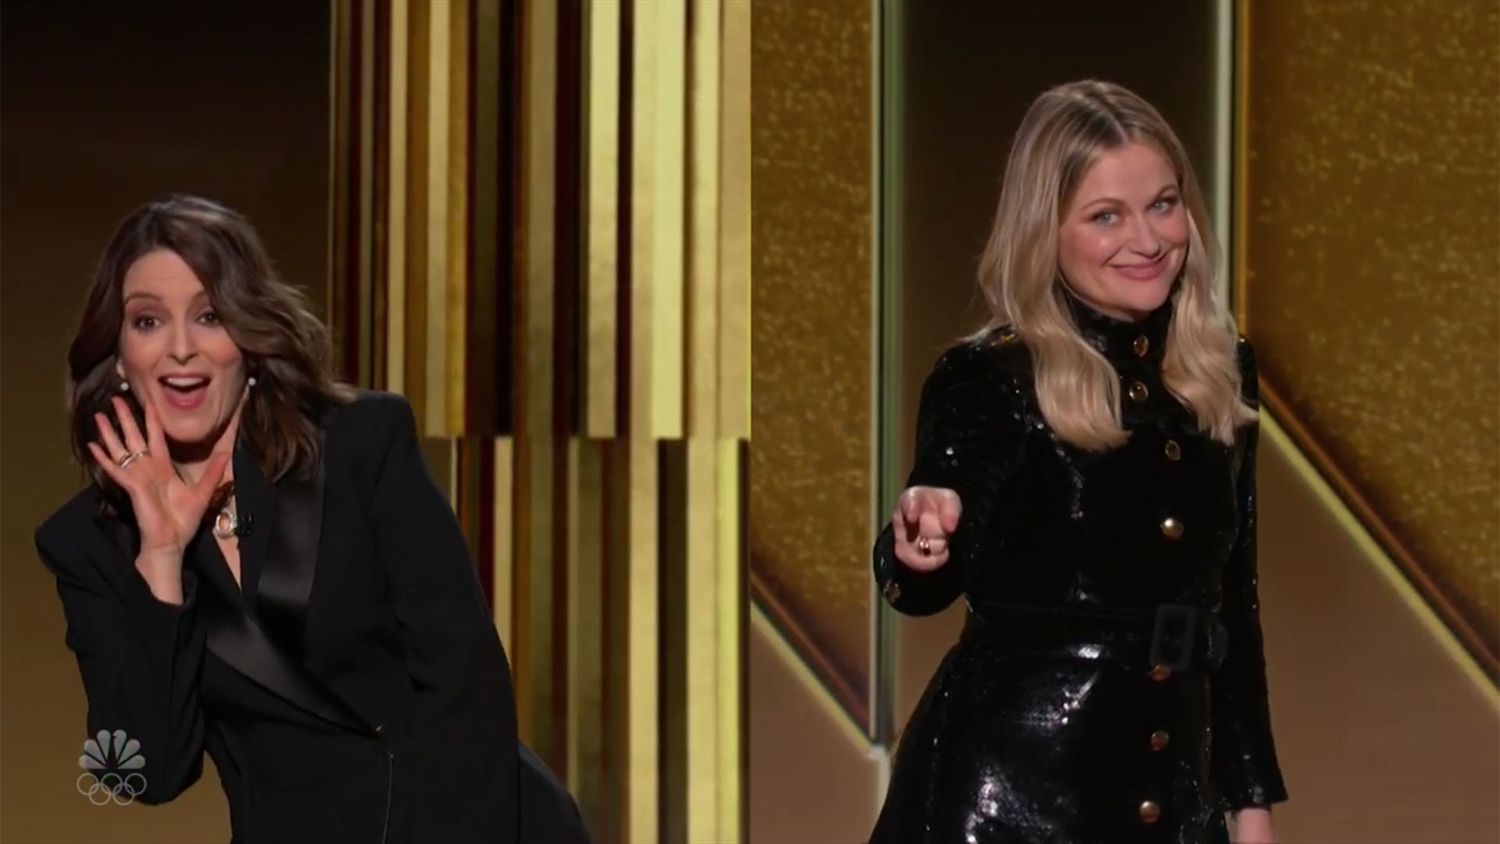 Hosts Tina Fey and Amy Poehler Brought the Laughs